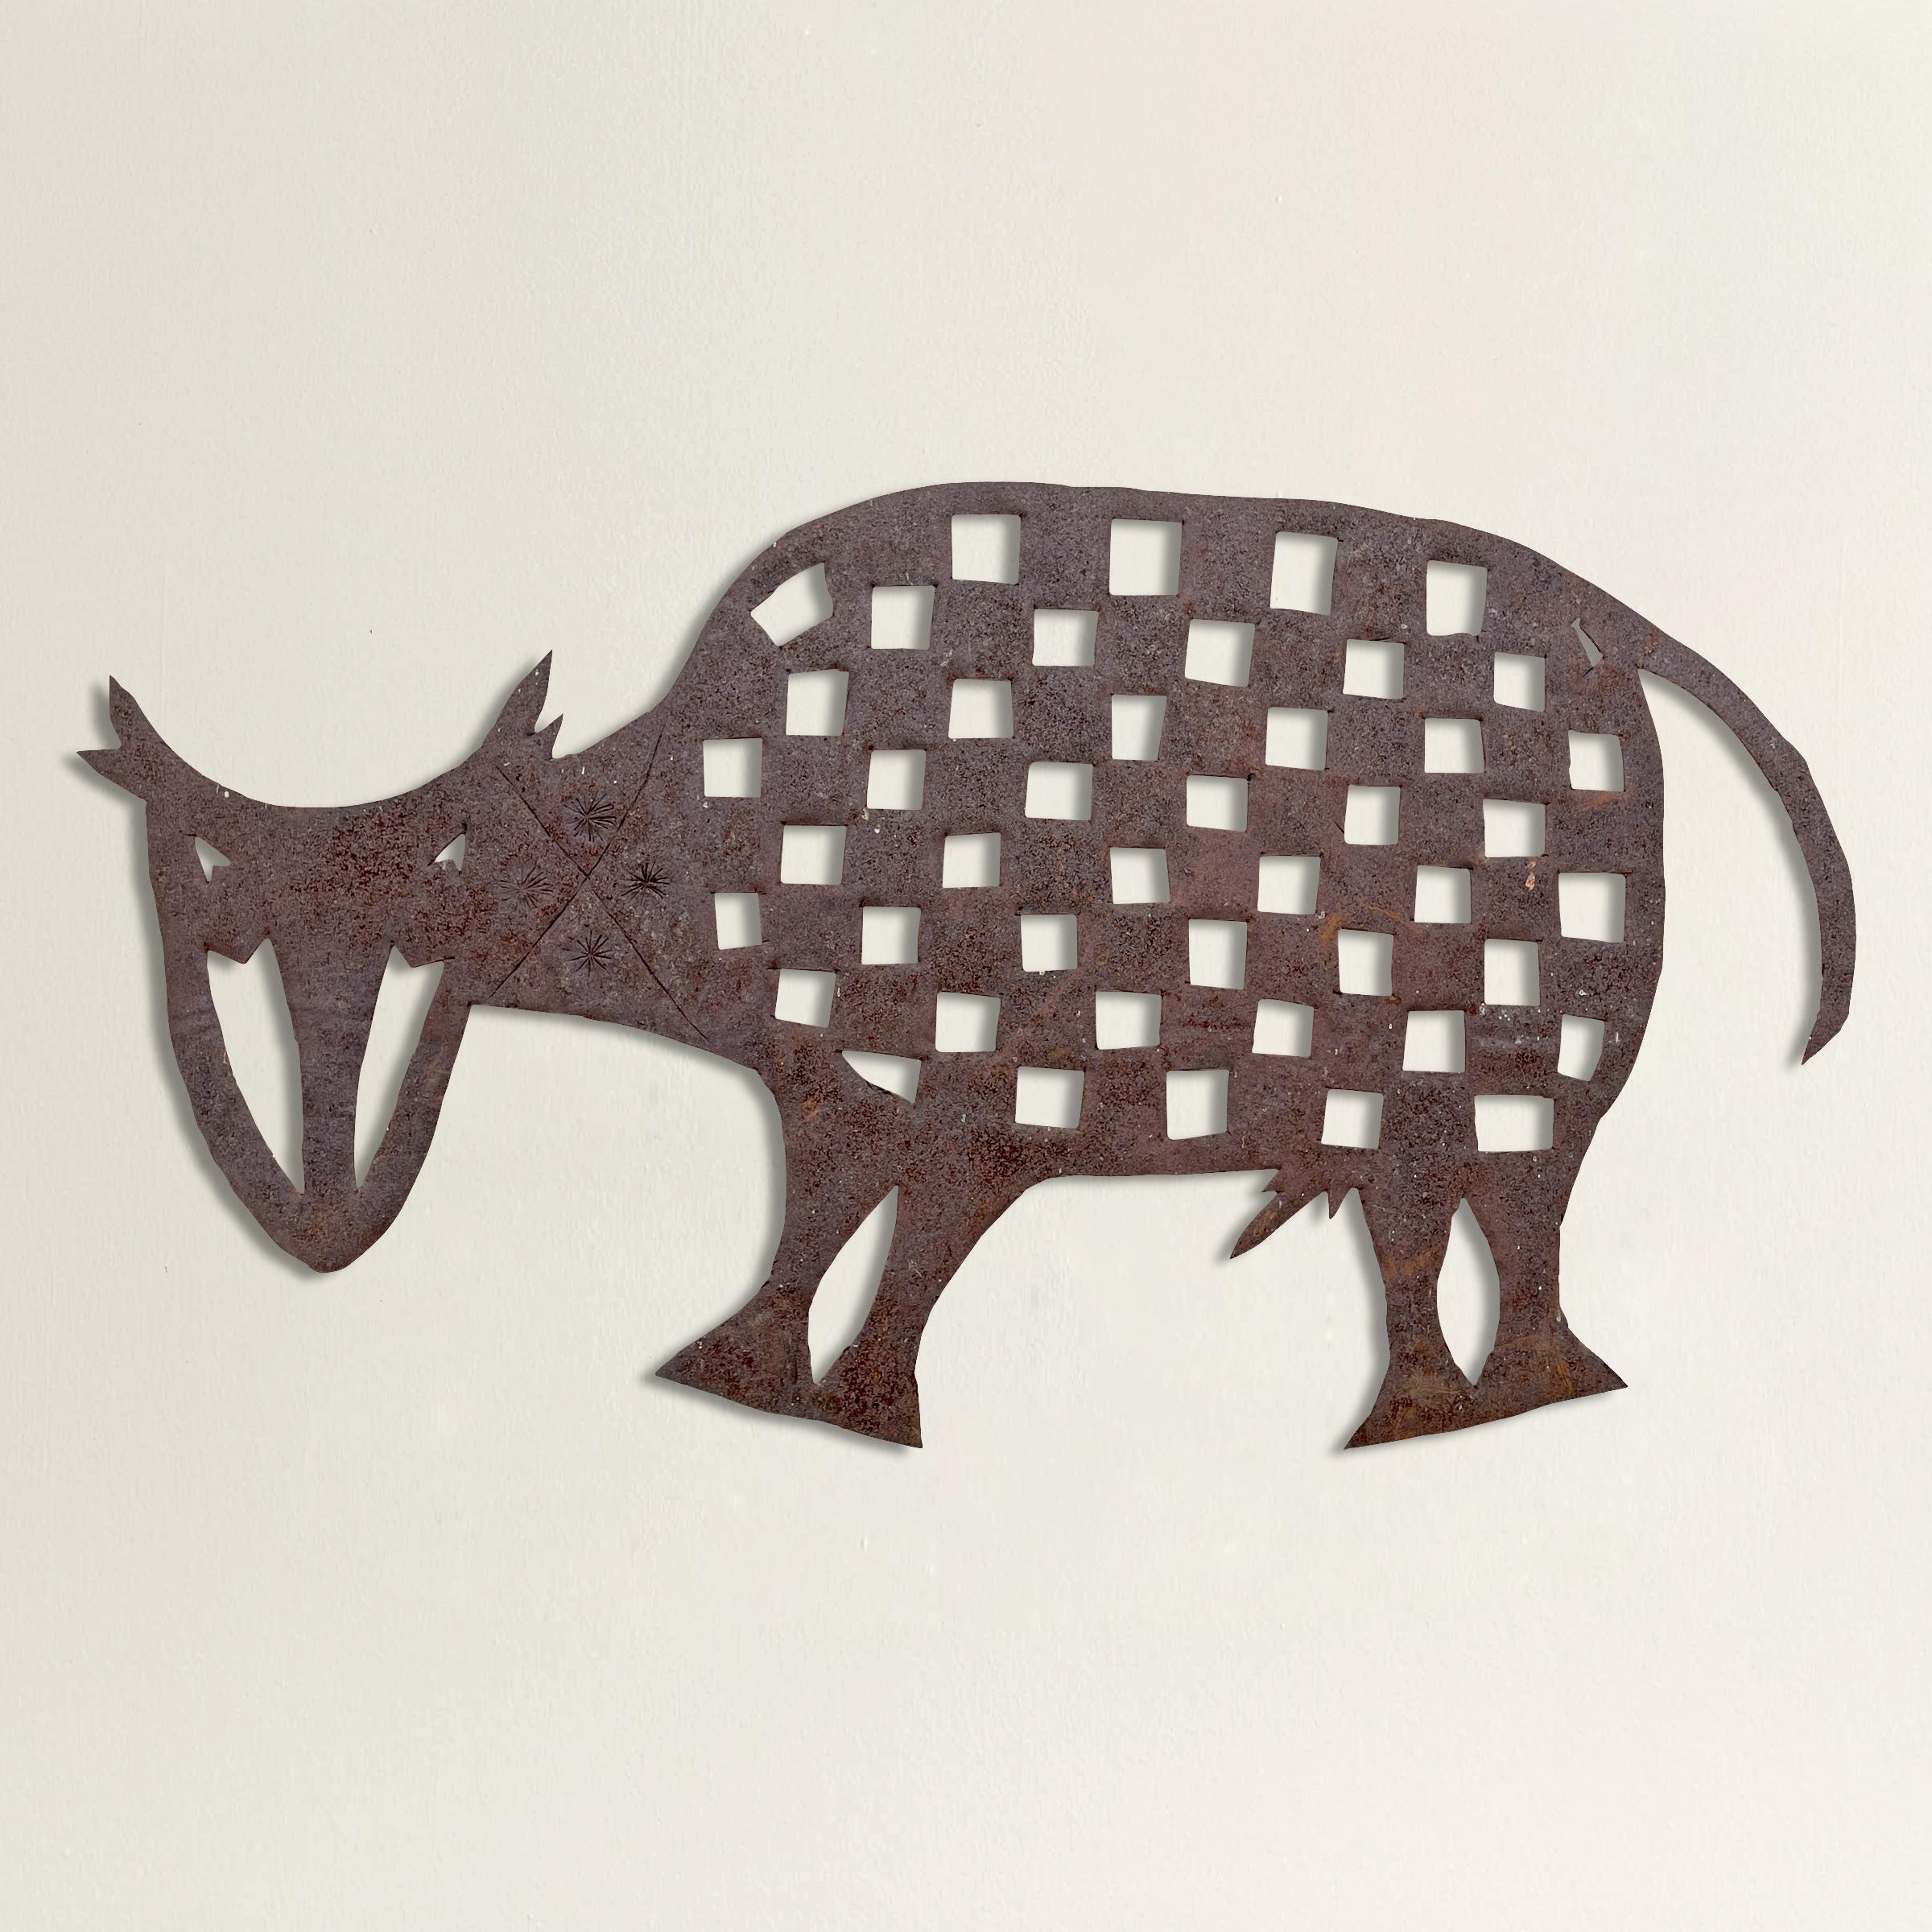 A whimsical American Folk Art iron sculpture depicting a bull with a checkerboard body and stamped starburst patterns on the neck. A custom steel wall mount is included.